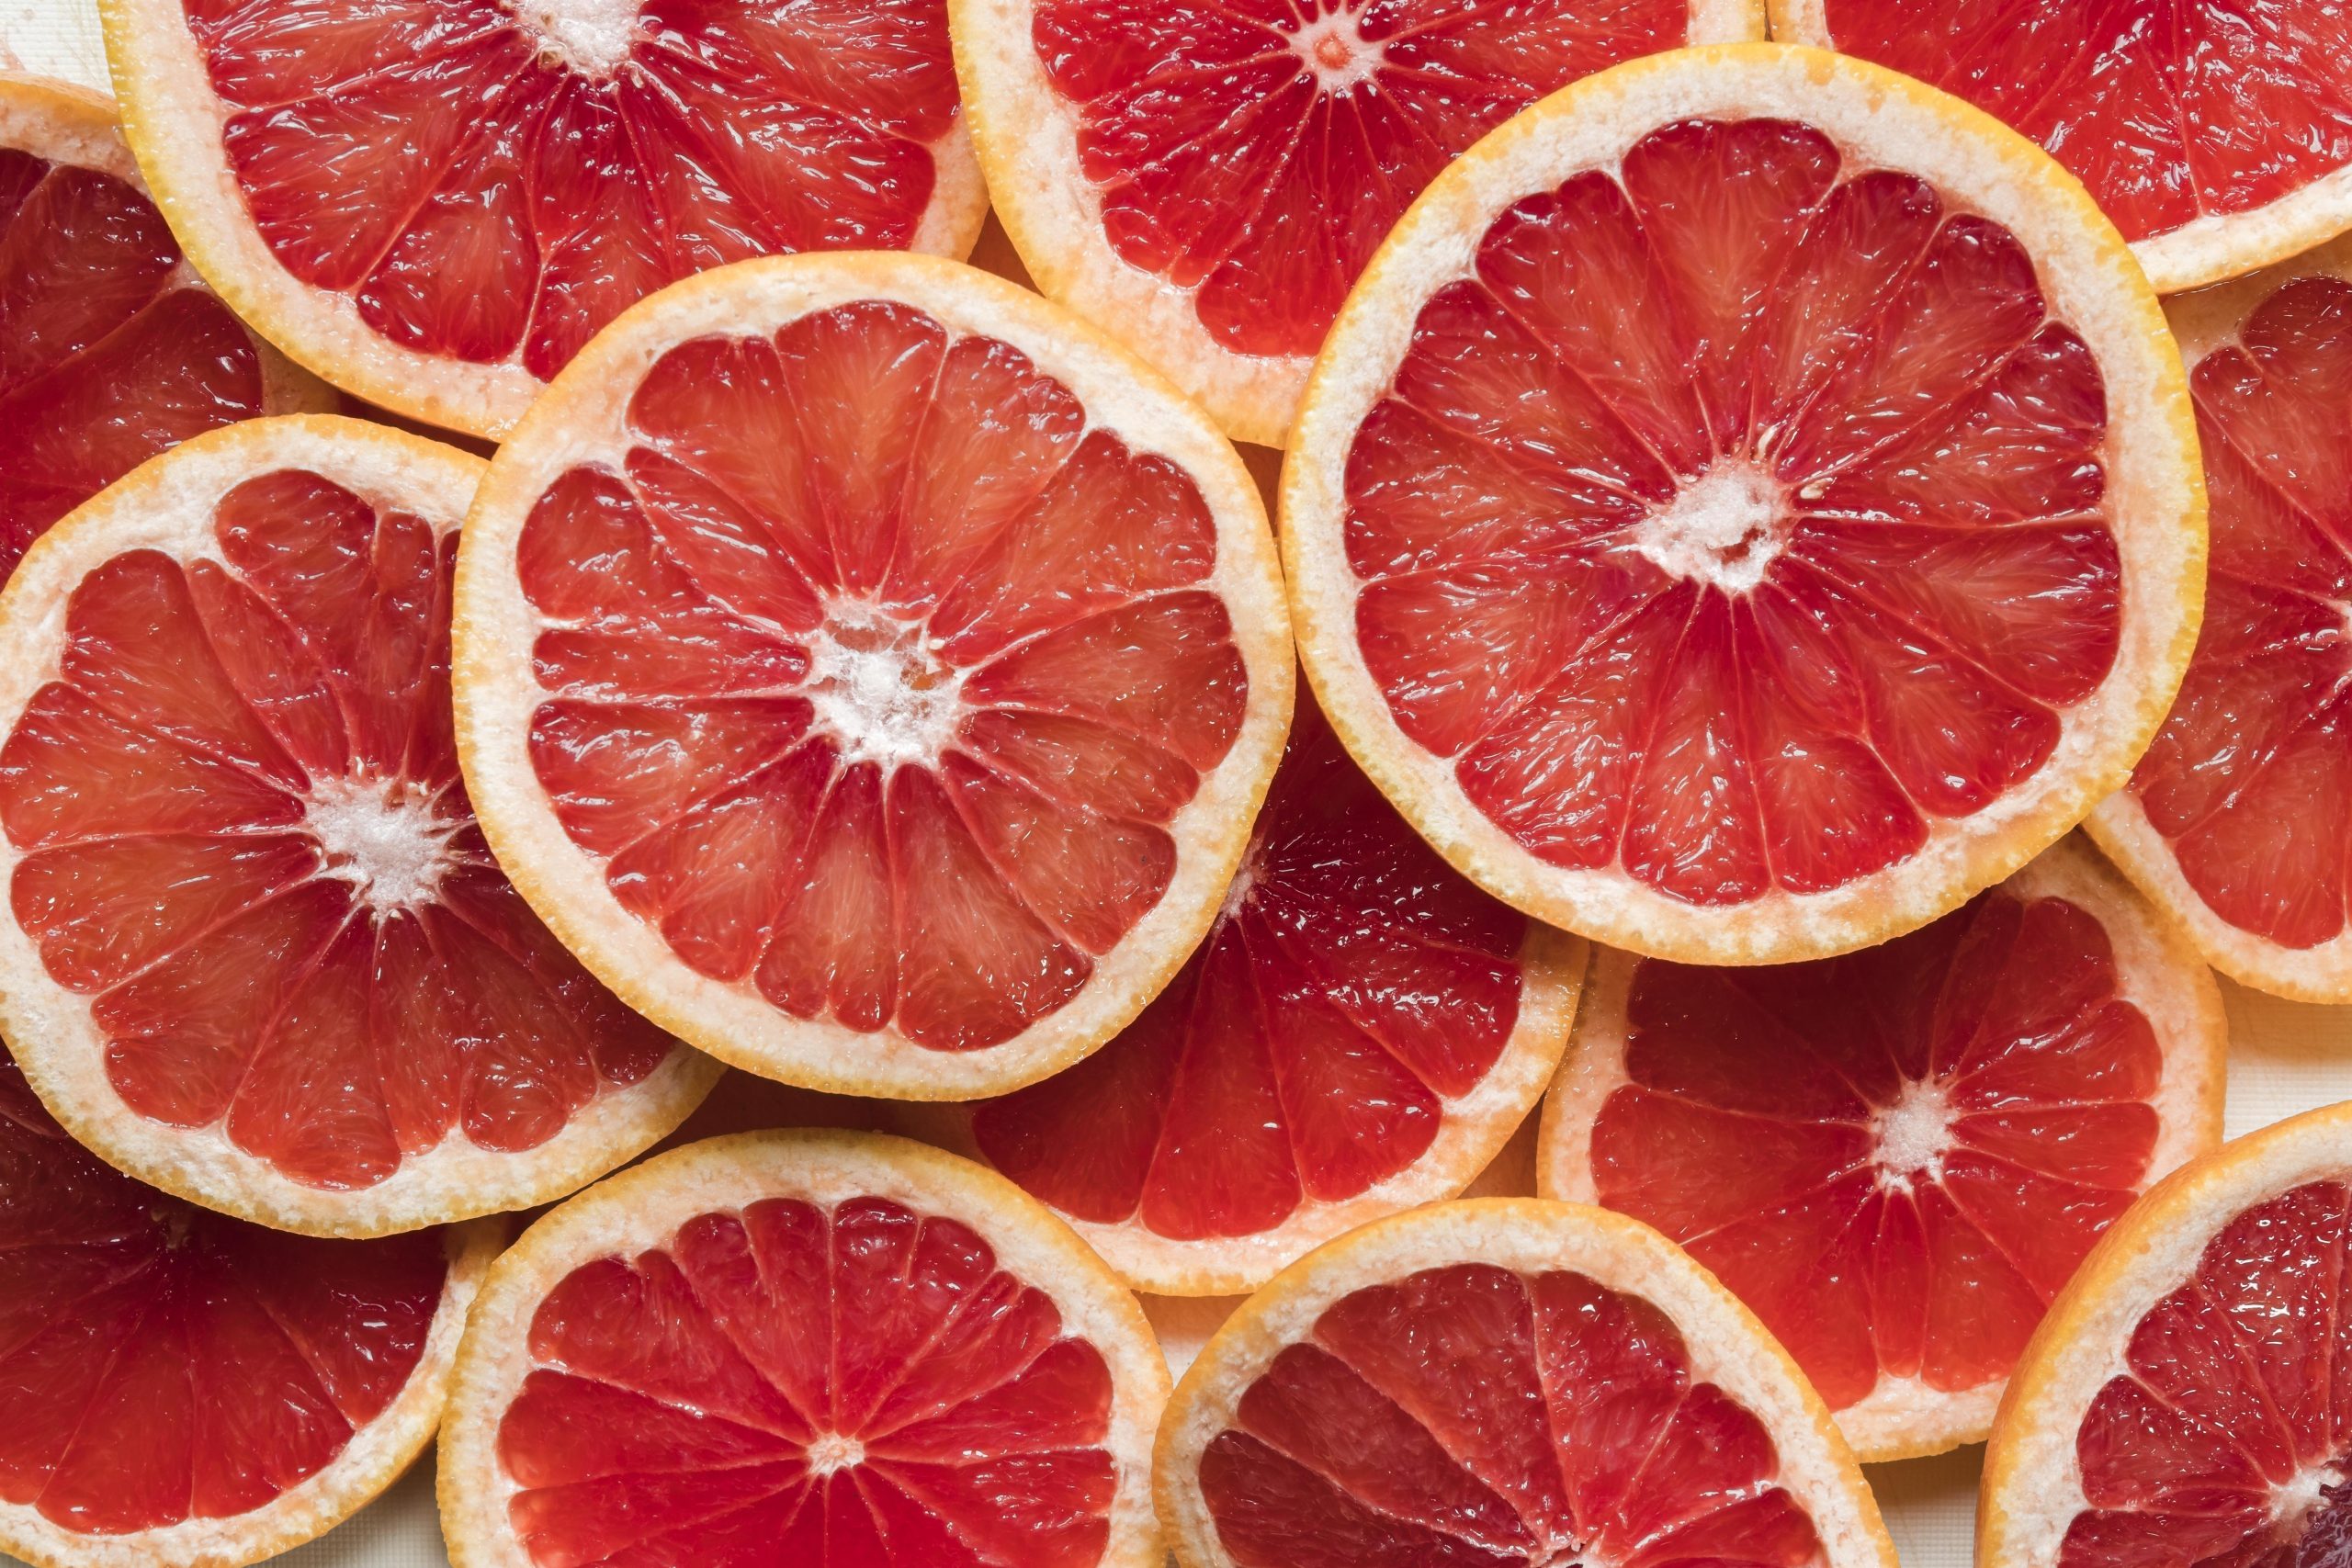 Grapefruit Benefits Sexually: General health benefits that indirectly impact your sex life!